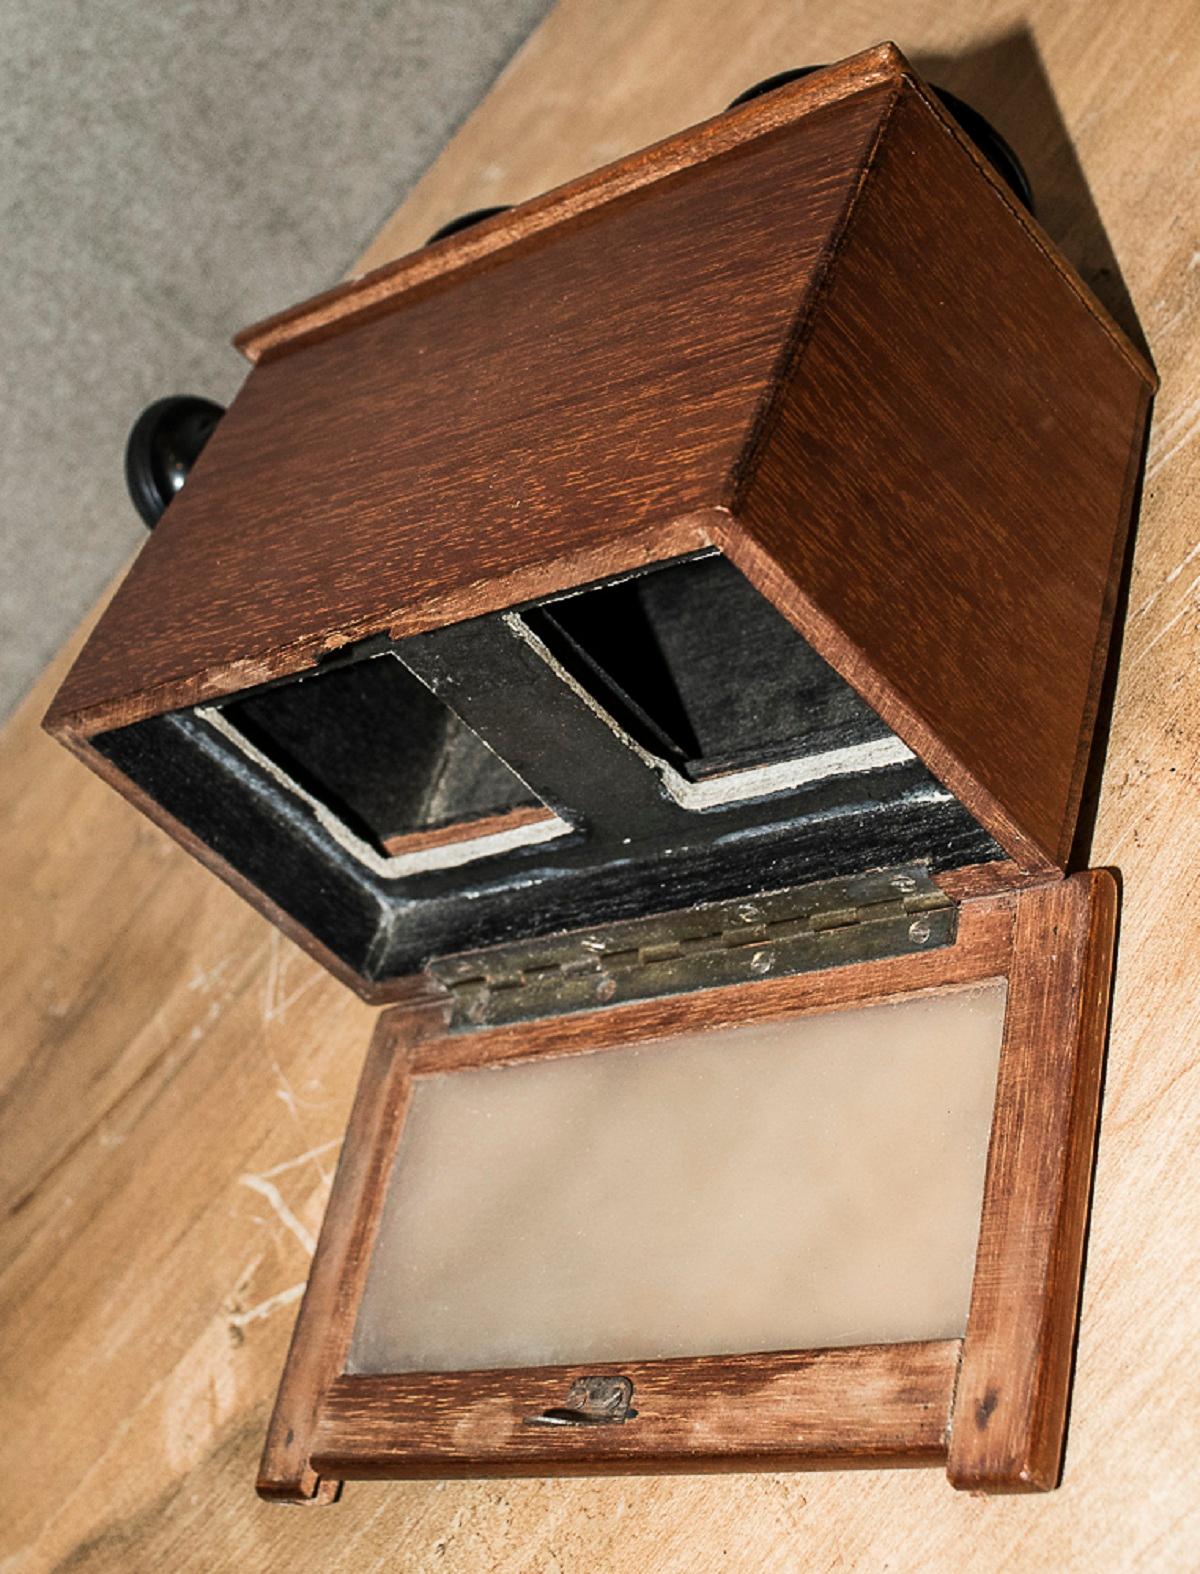 Early 20th Century Edwardian Mahogany English Stereoscope or Old Photo Viewer